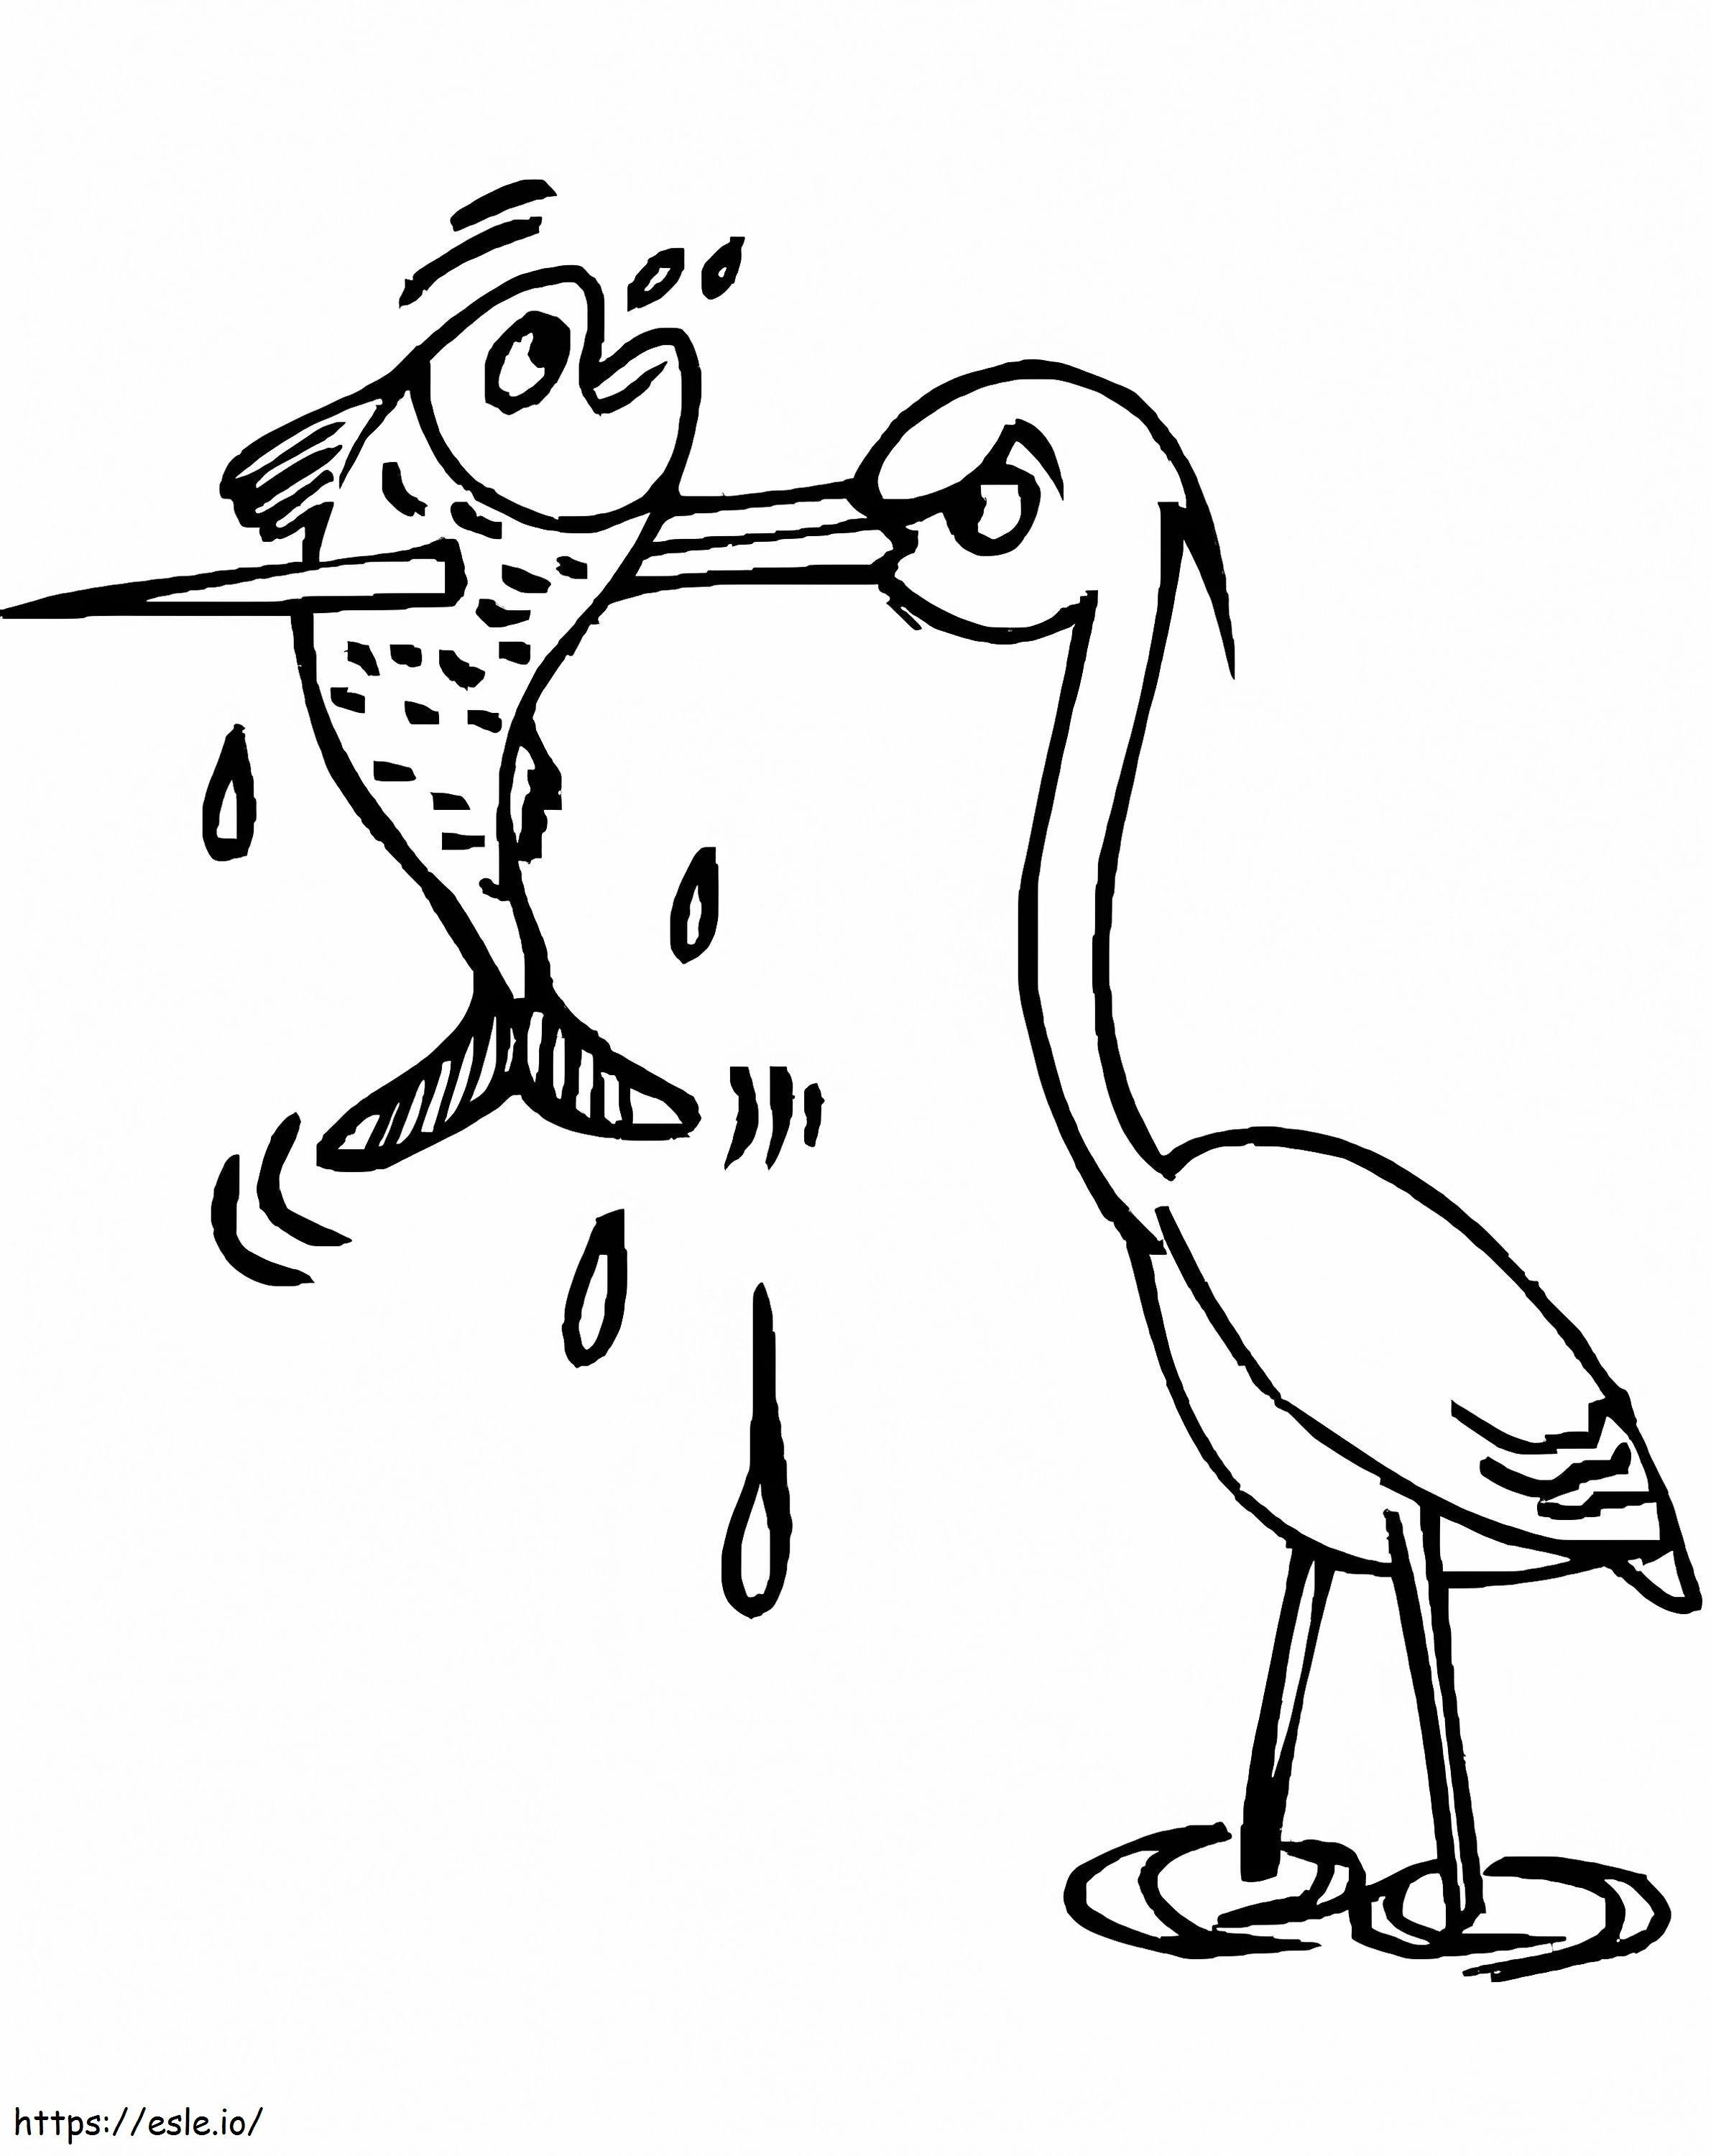 Stork And Fish coloring page